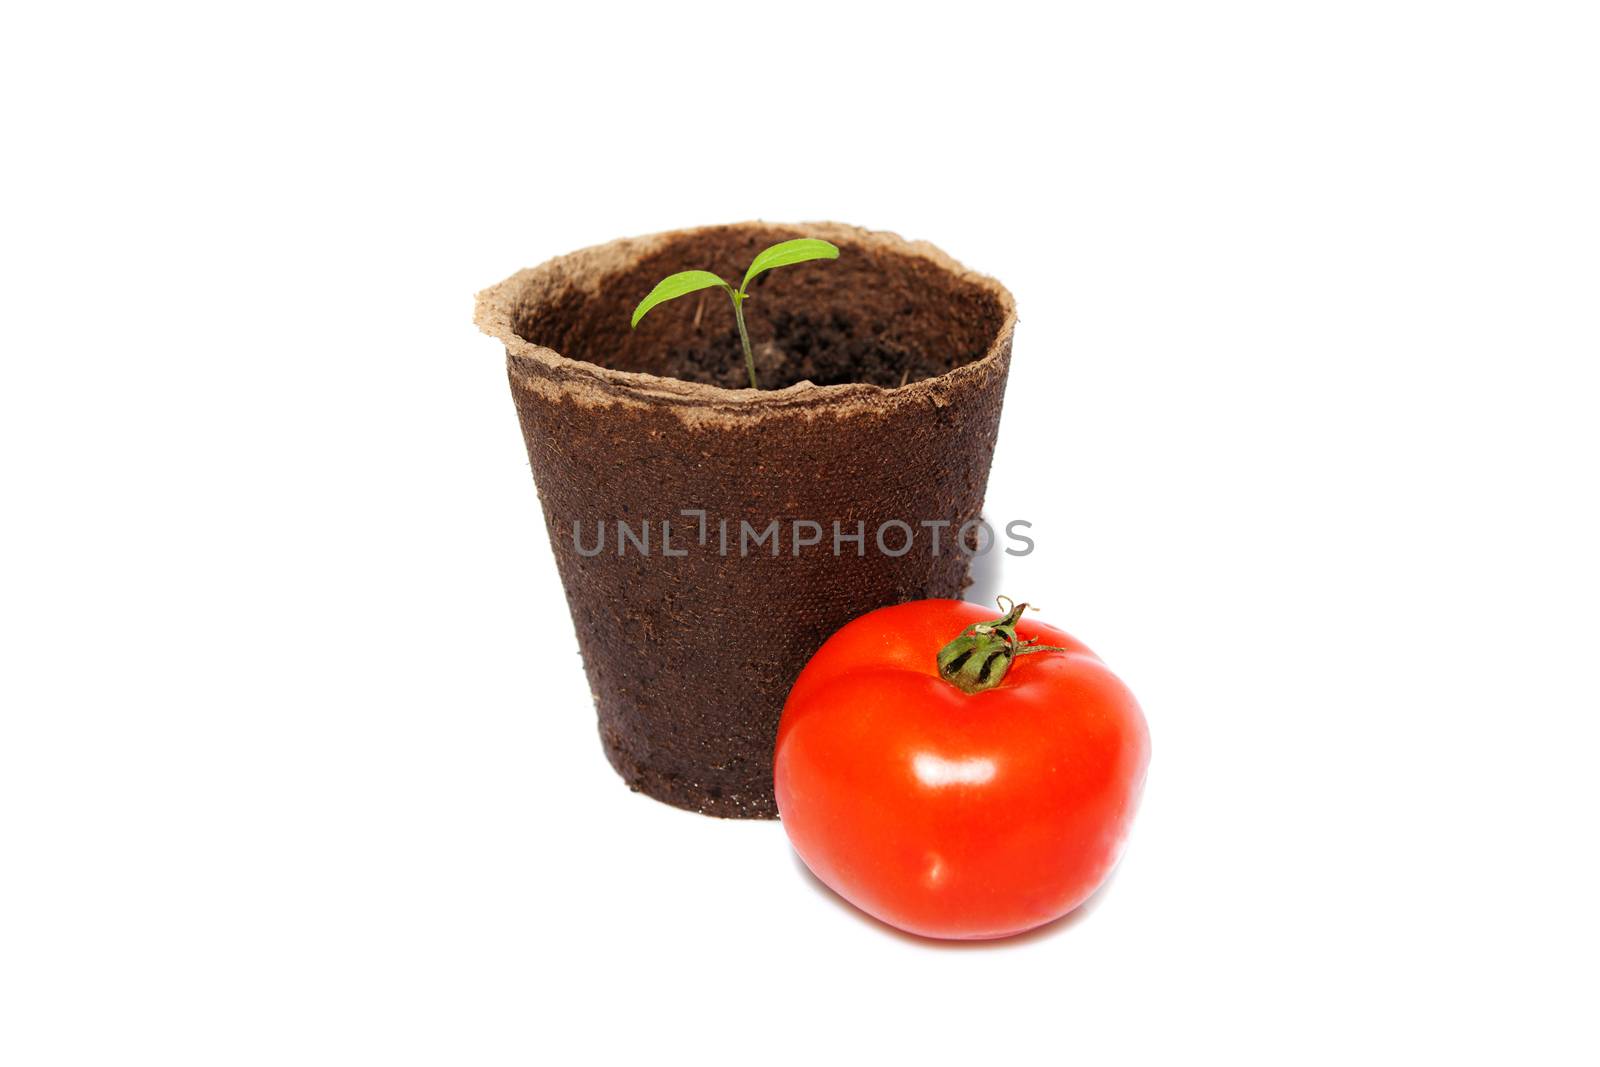 new sprout of tomato and the same vegetable